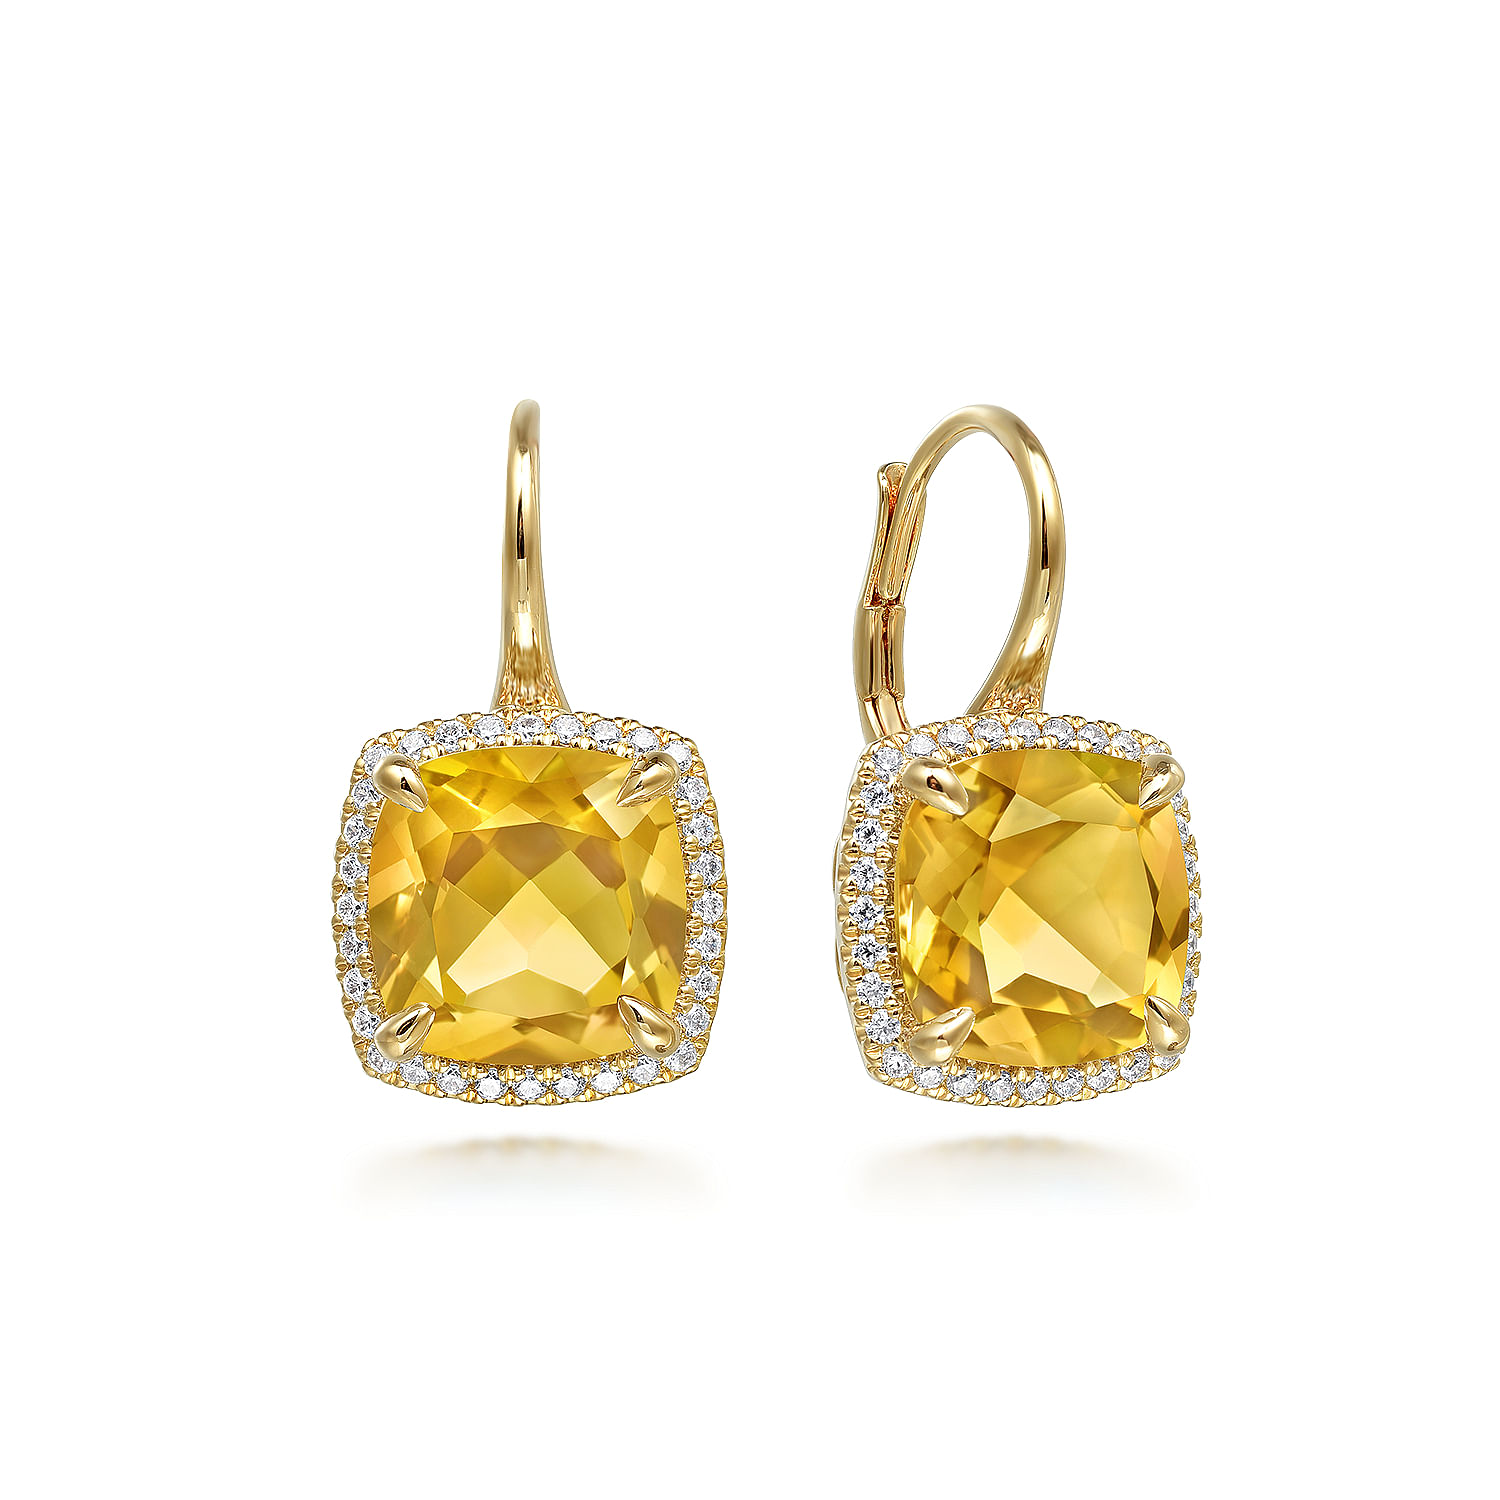 14K Yellow Gold Diamond and Citrine Cushion Cut Earrings With Flower Pattern J-Back